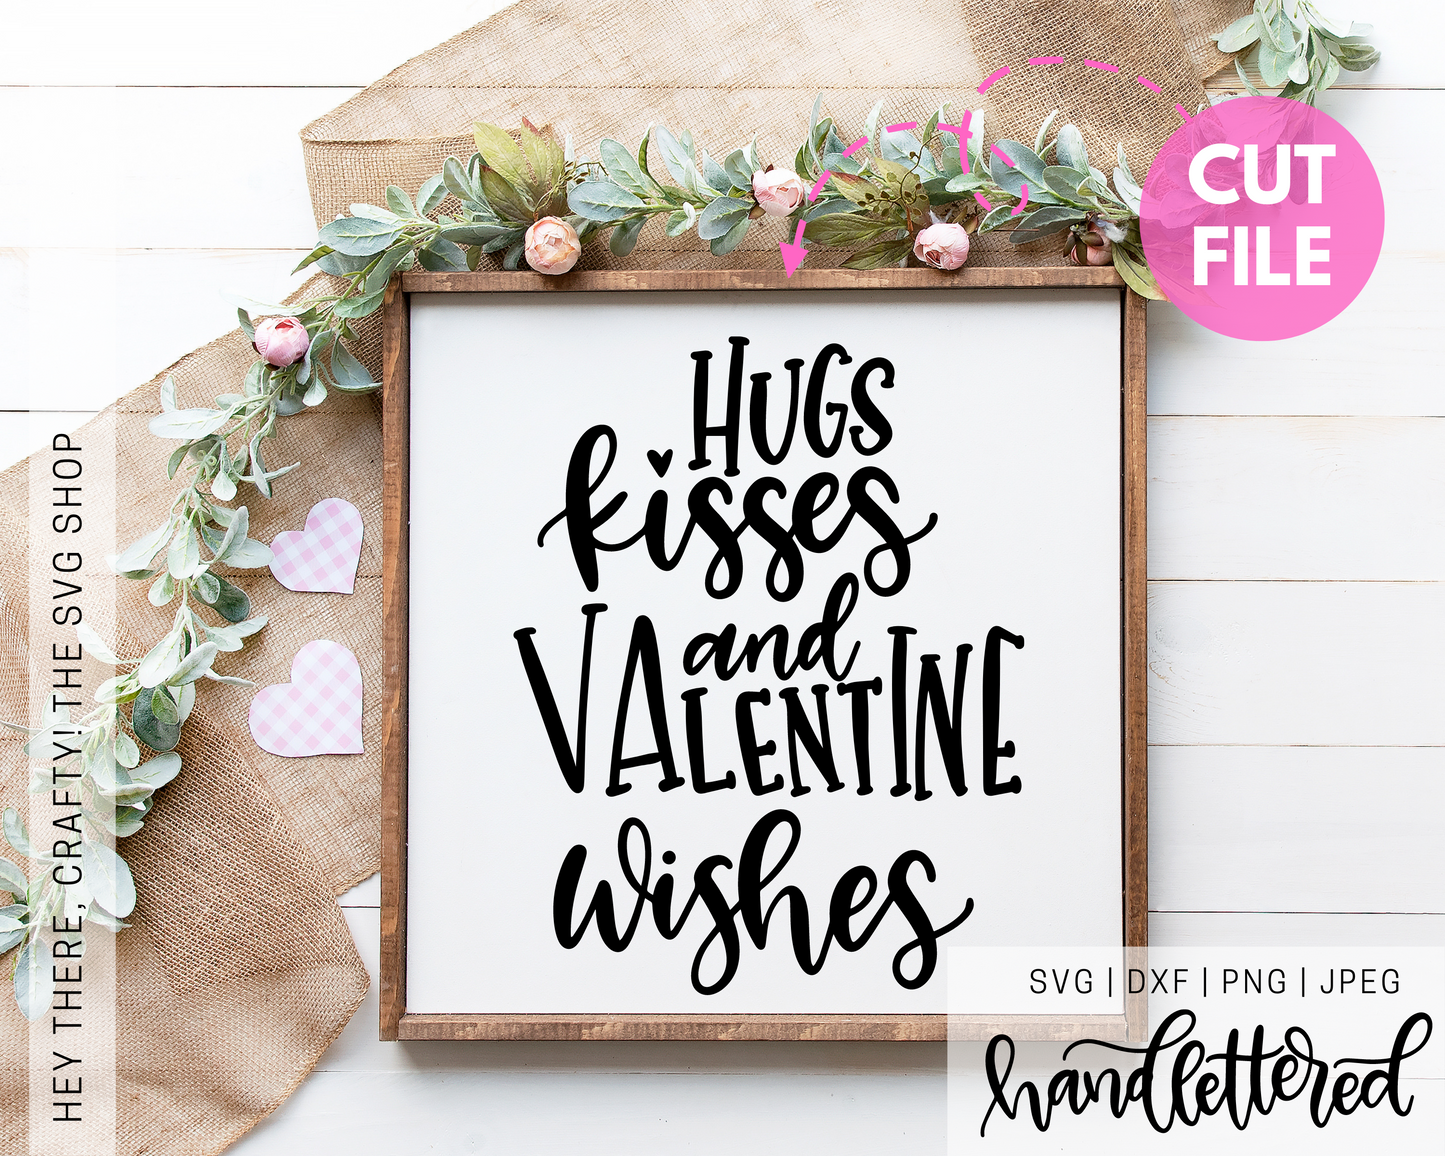 Hugs Kisses and Valentine Wishes | SVG, PNG, DXF, JPEG